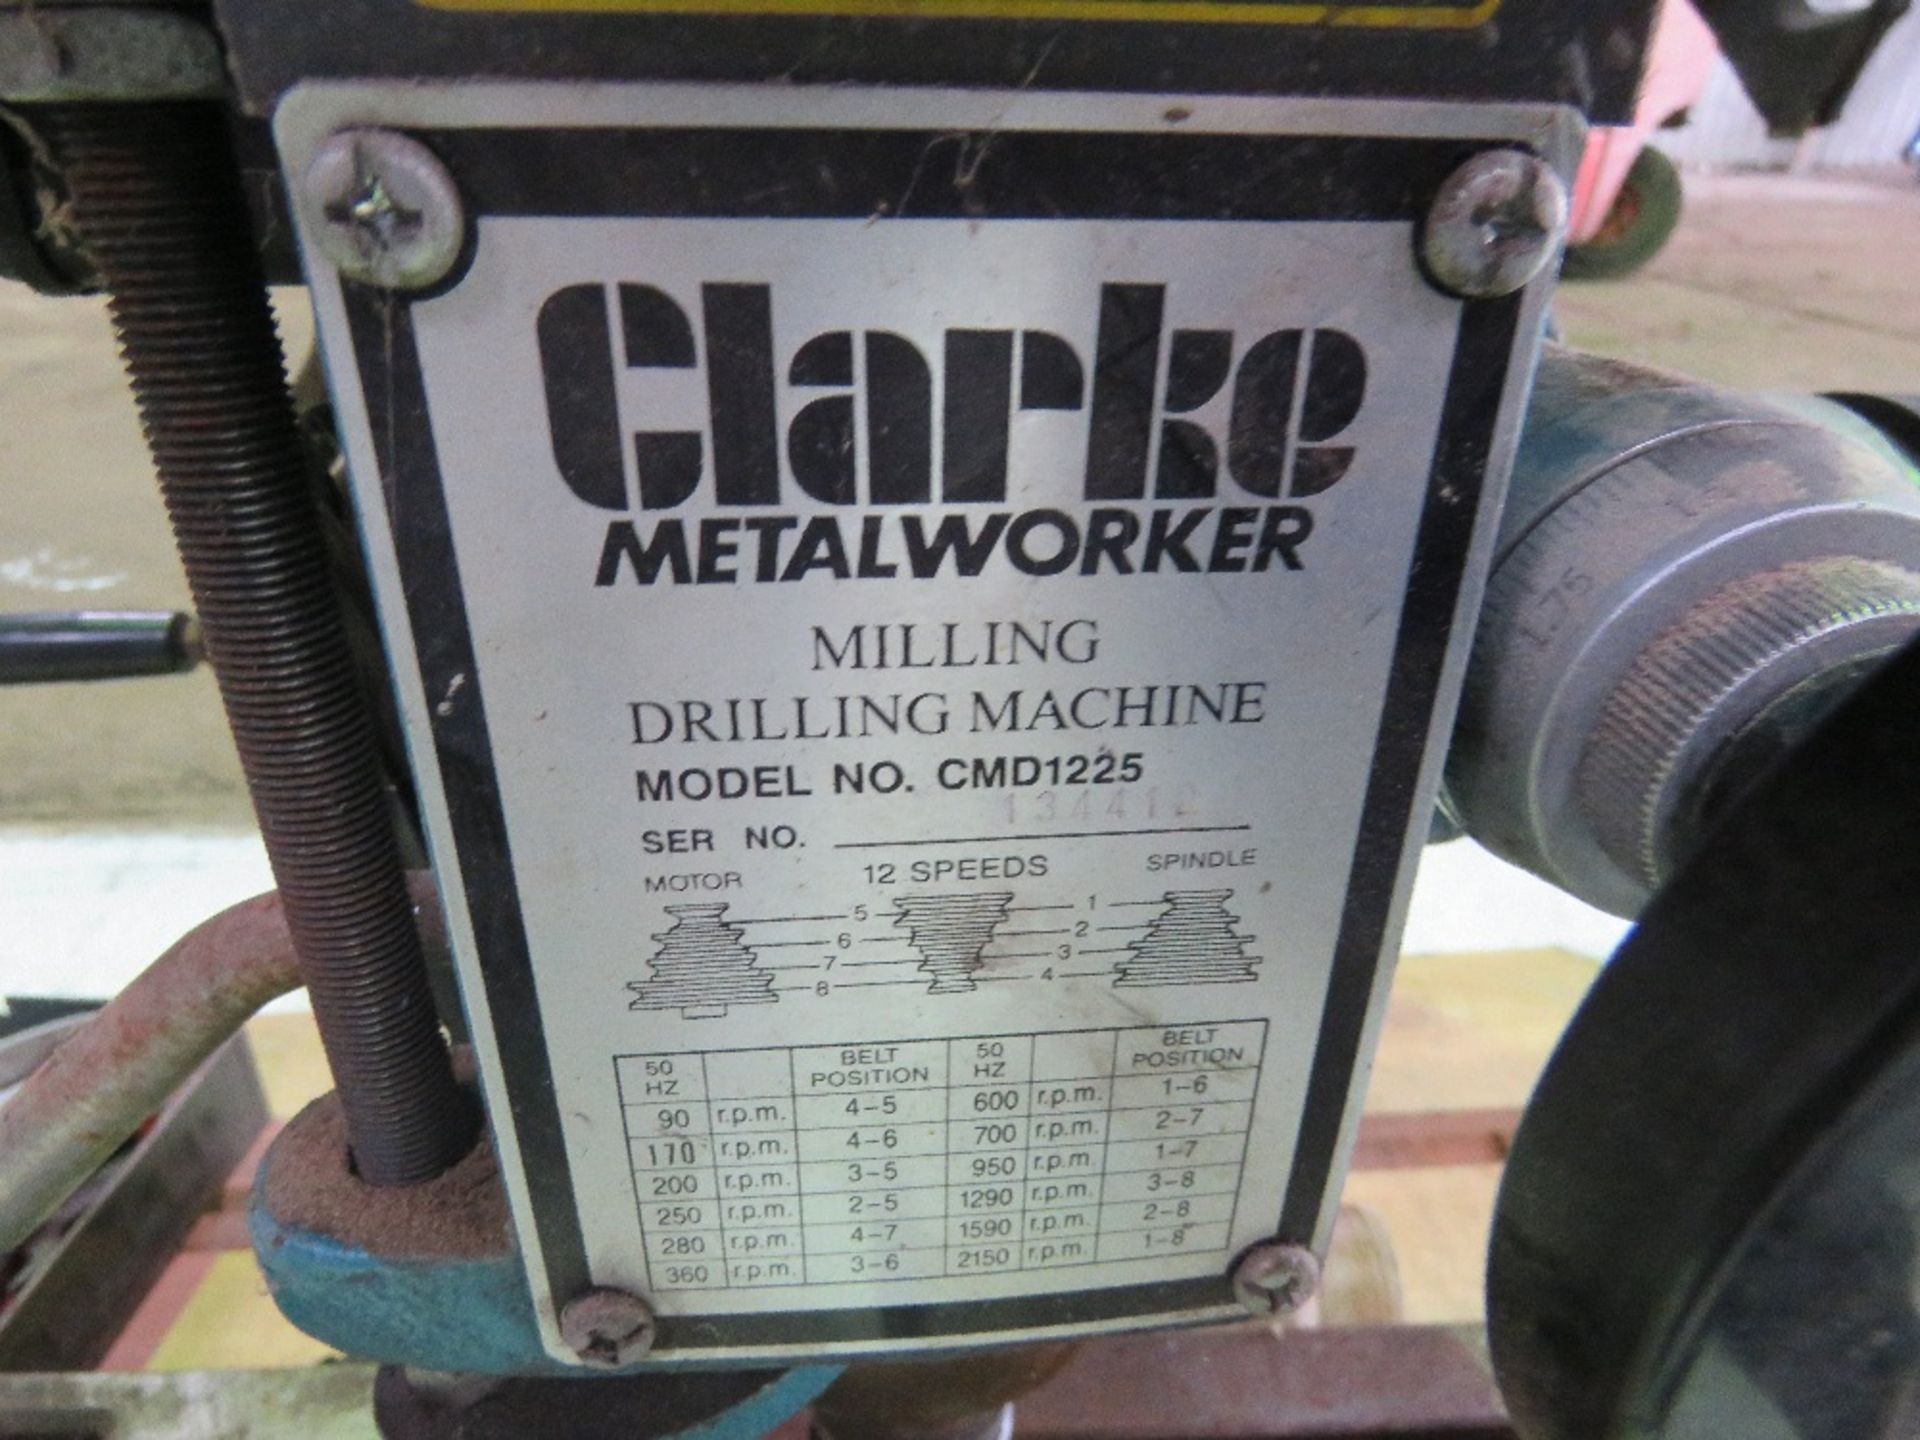 CLARKE METALWORKER MINI MILL/DRILL WITH SOME TOOLING AS SHOWN, 240VOLT POWERED. WORKING WHEN RECENTL - Image 8 of 8